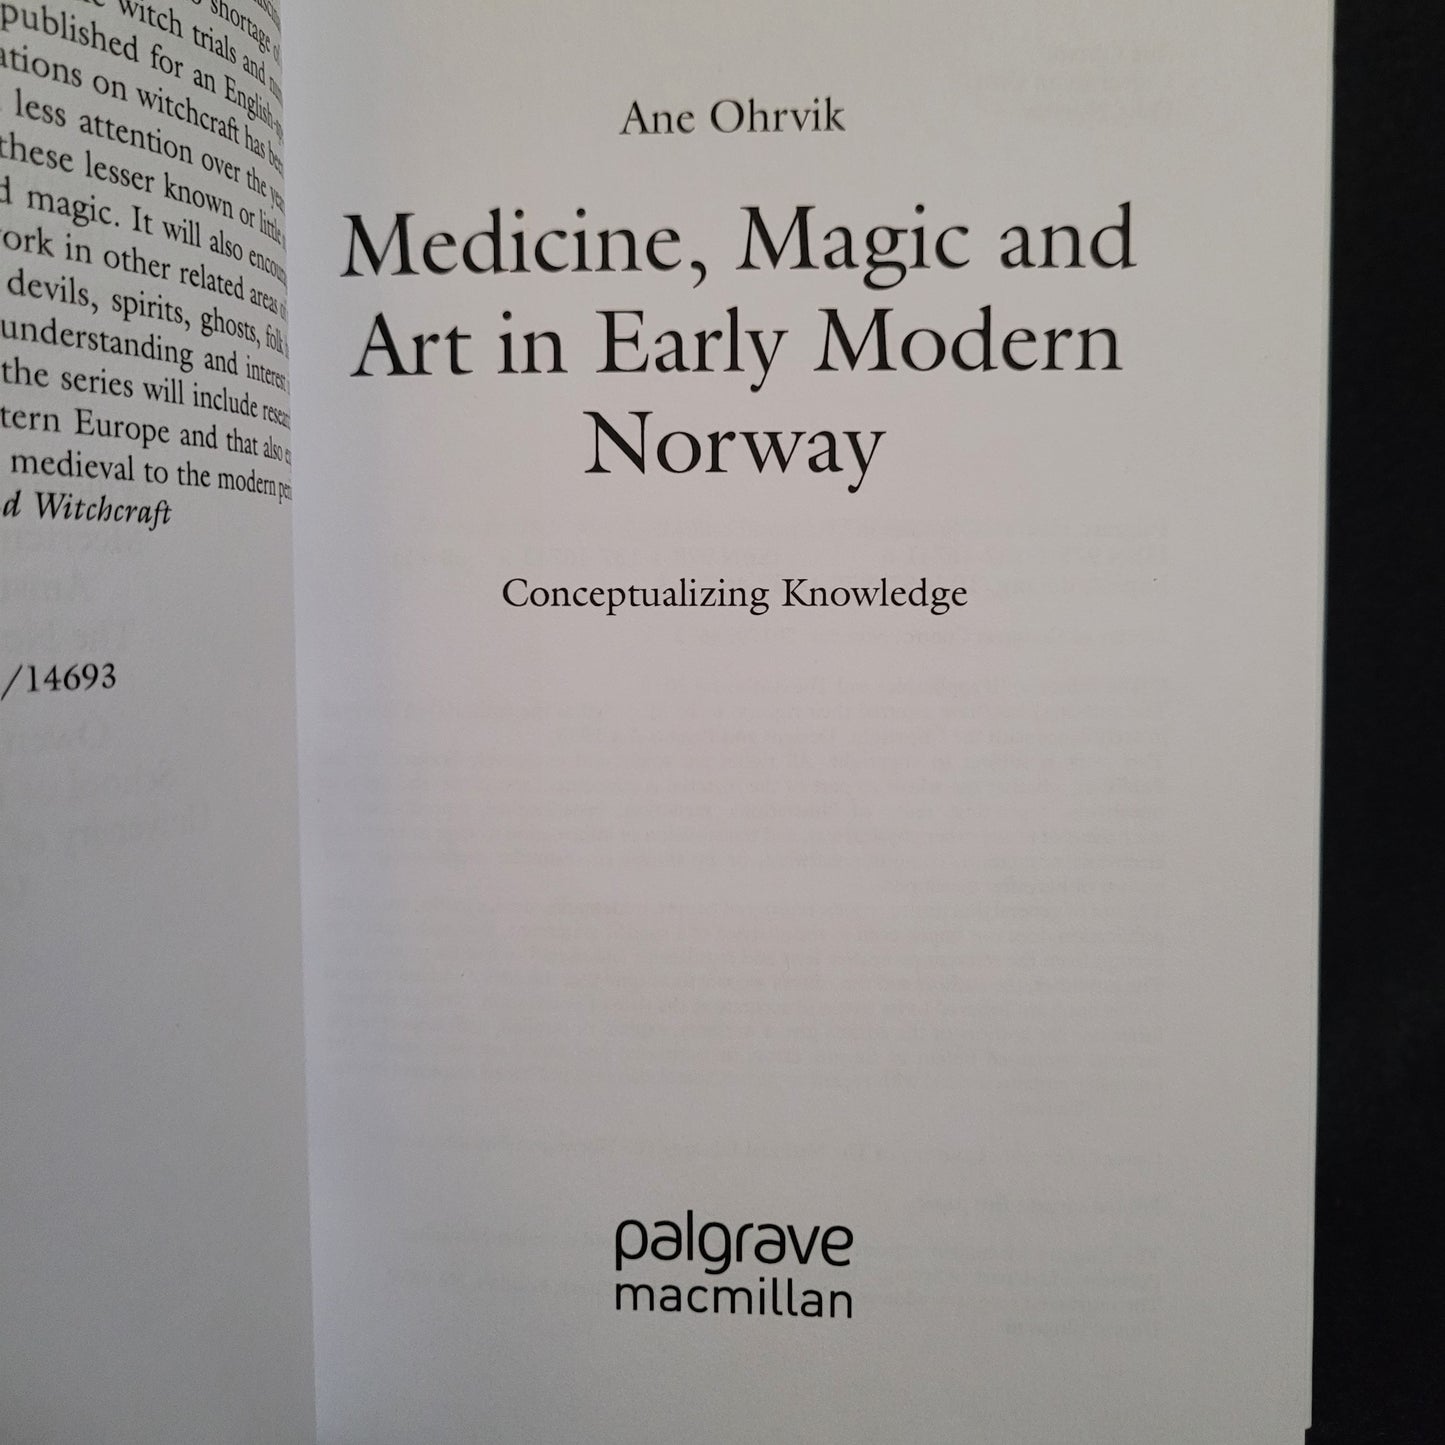 Medicine, Magic and Art in Early Modern Norway: Conceptalizing Knowledge by Ane Ohrvik (Palgrave Macmillan, 2018) Hardcover